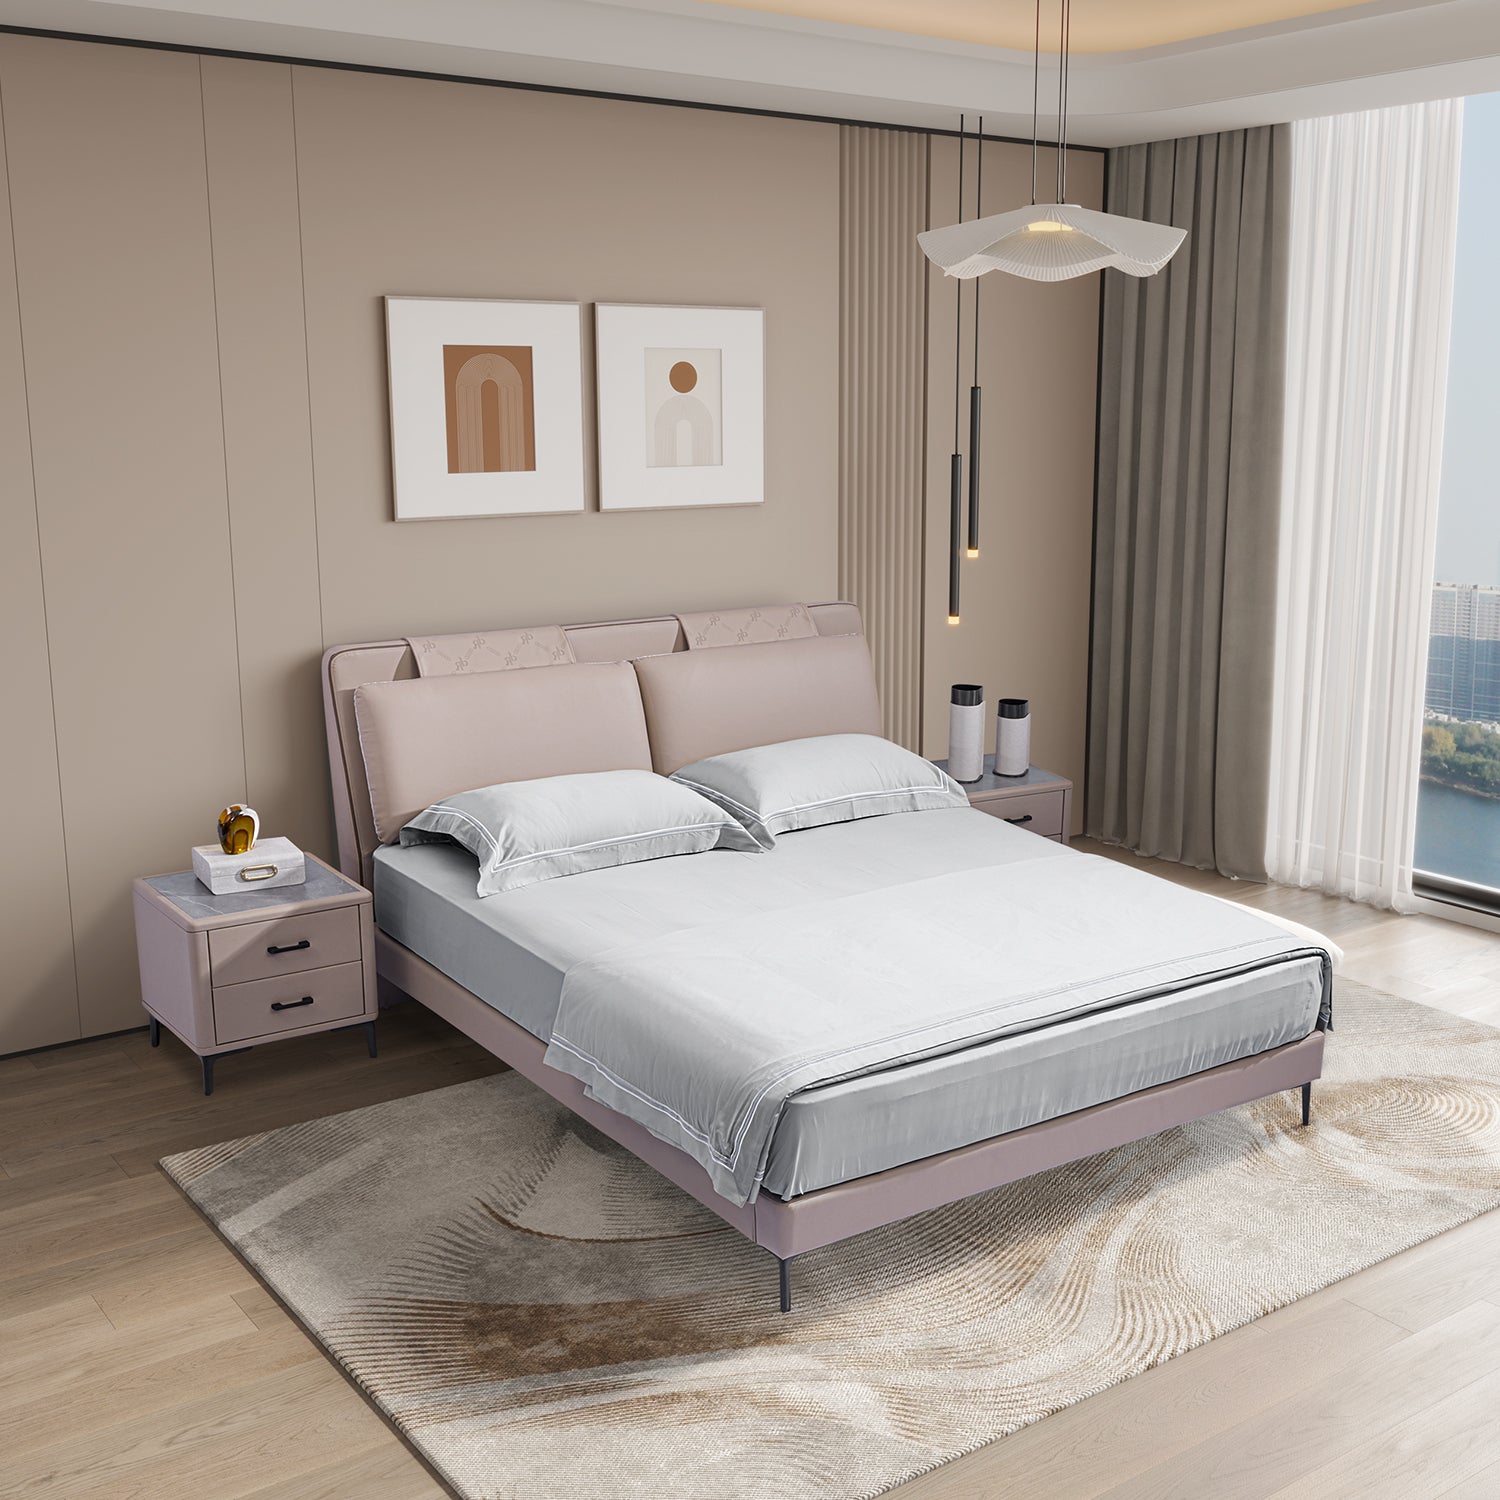 Modern bedroom featuring a light pink upholstered bed frame, light gray bedding, beige walls, patterned rug, hardwood flooring, and natural light from a large window.